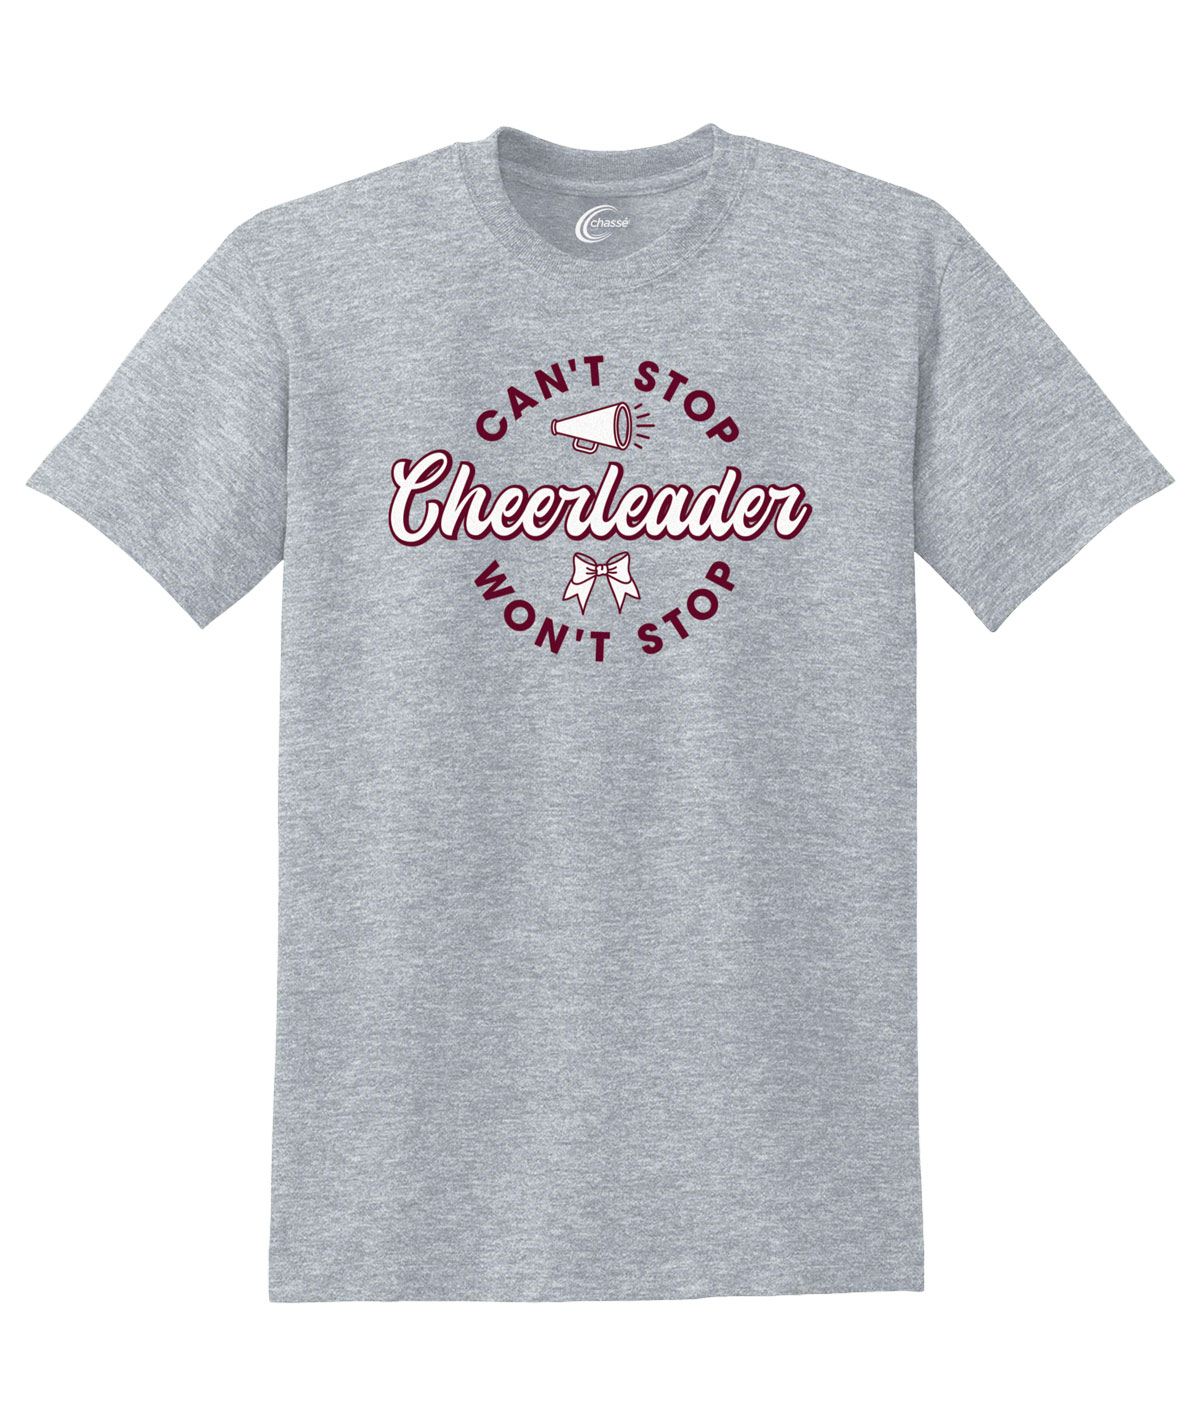 Chasse Can't Stop Won't Stop Cheerleader Tee